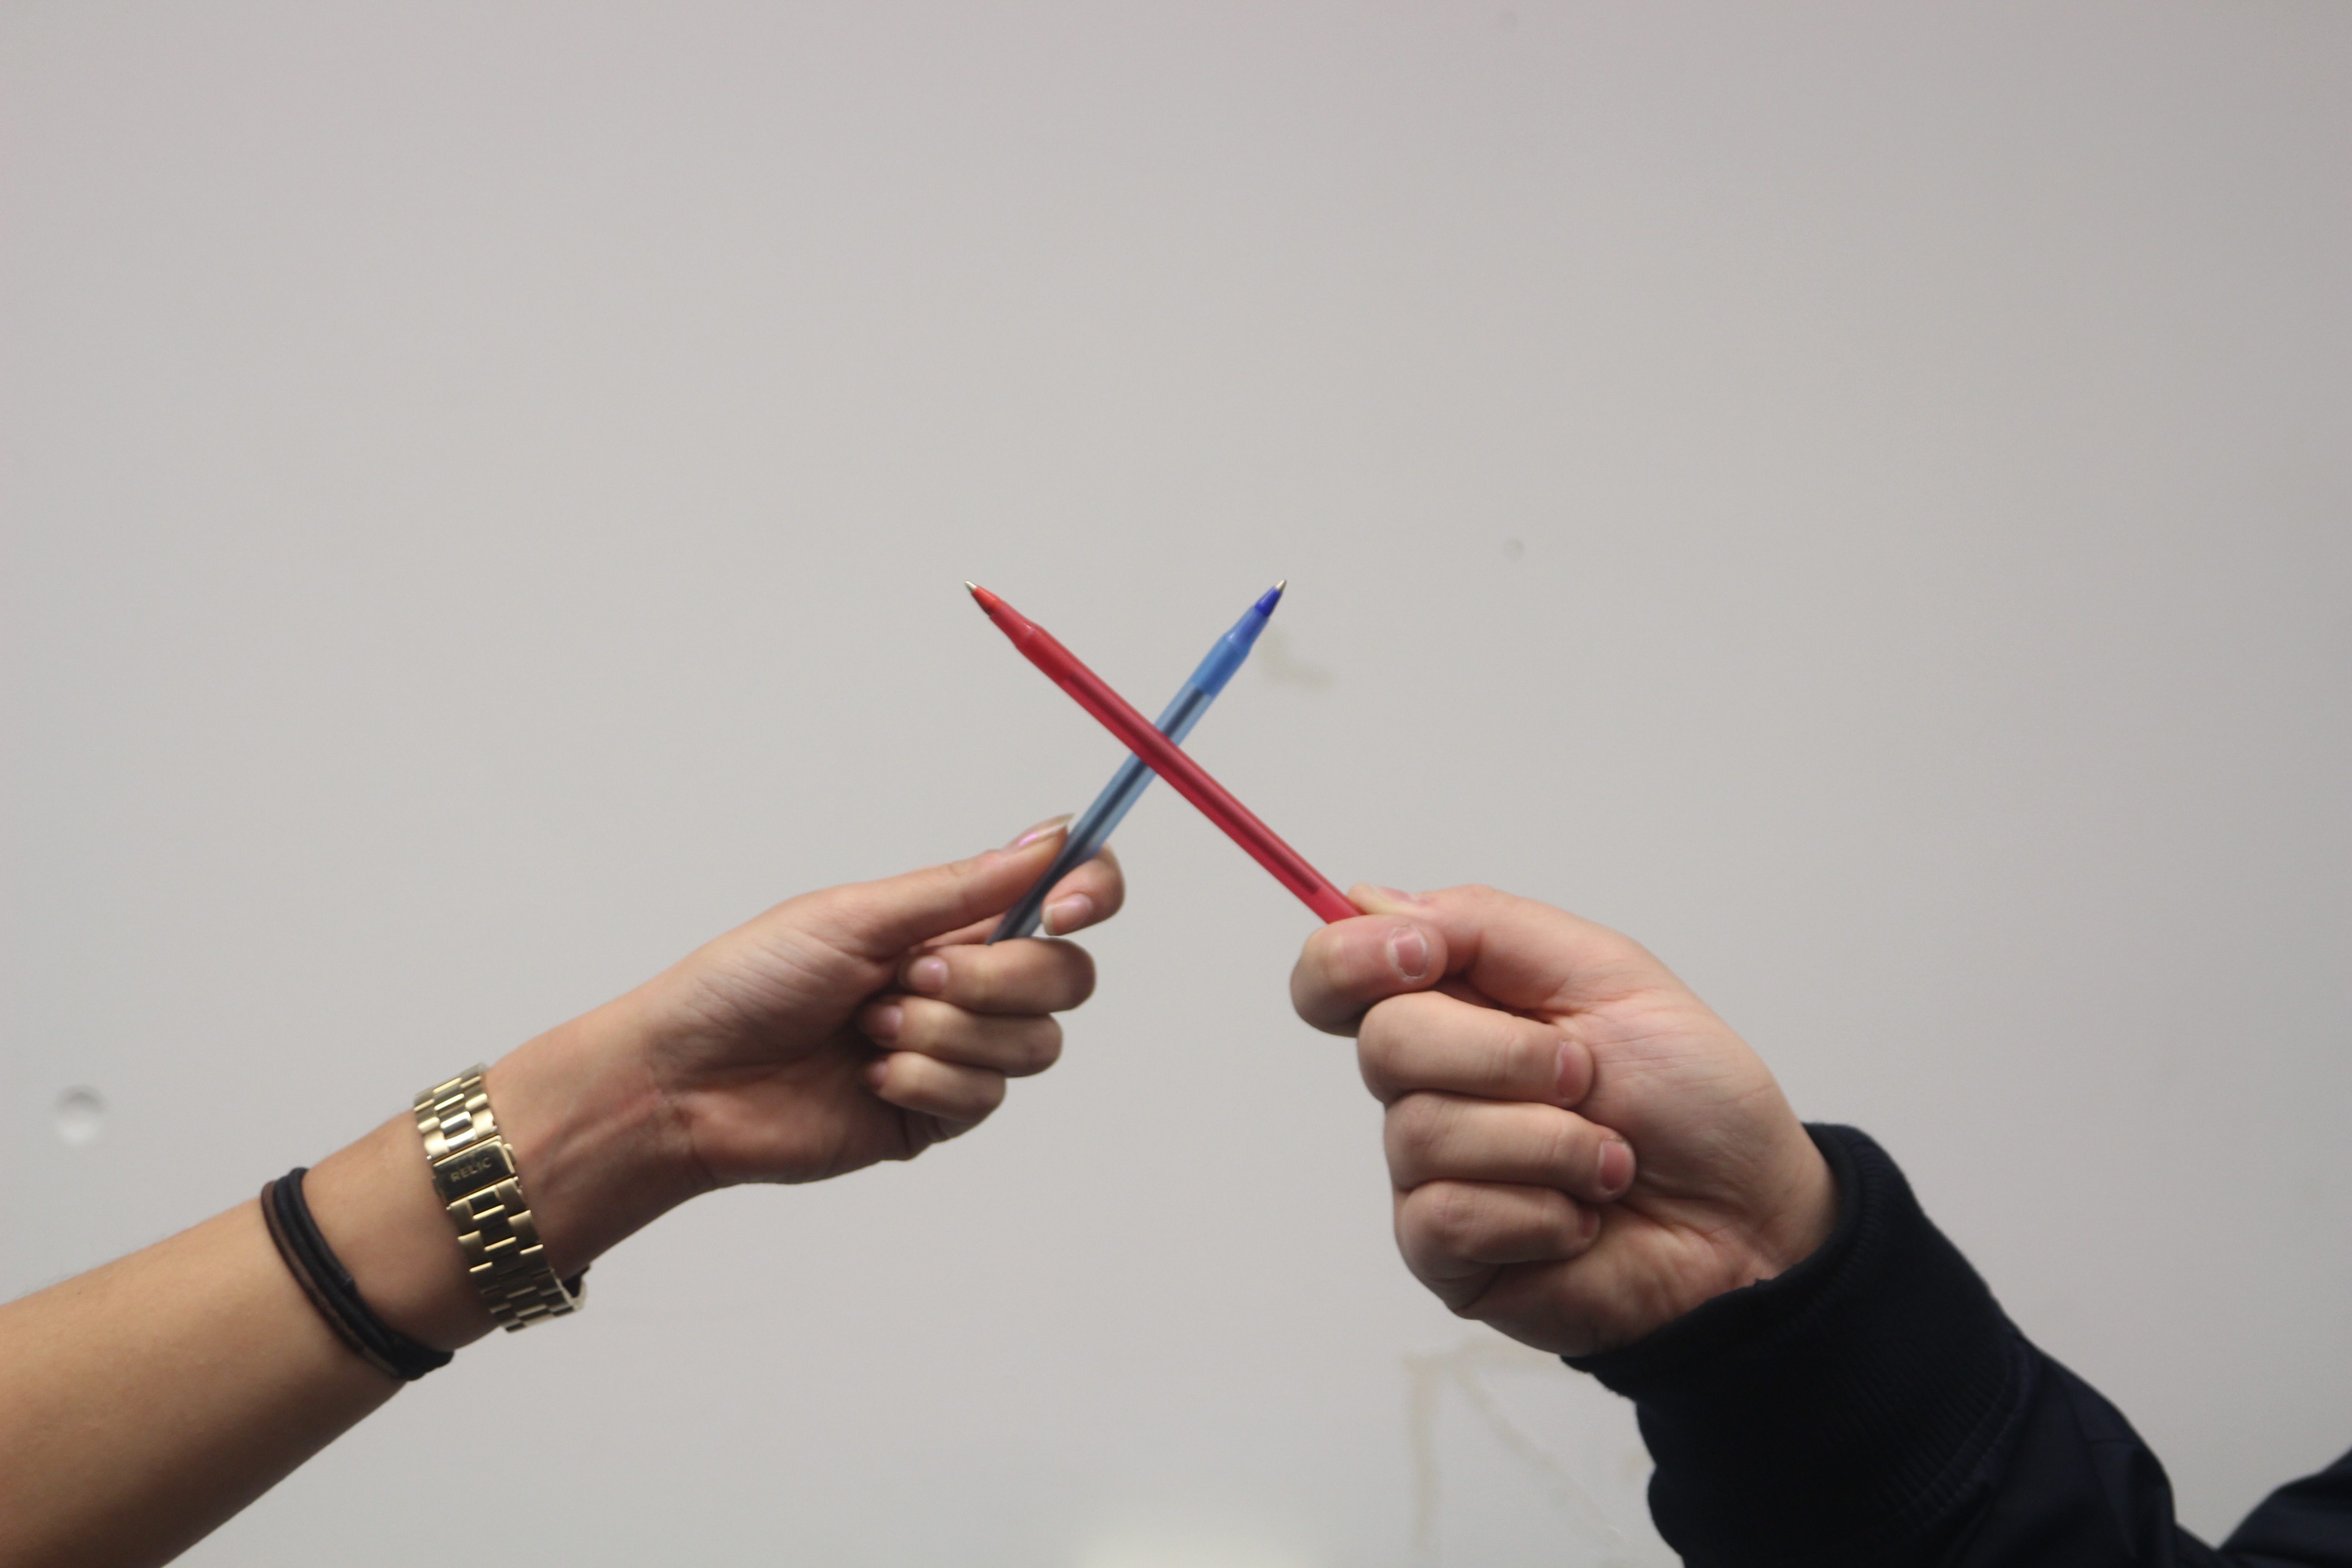 Two pens being held in the shape of an x